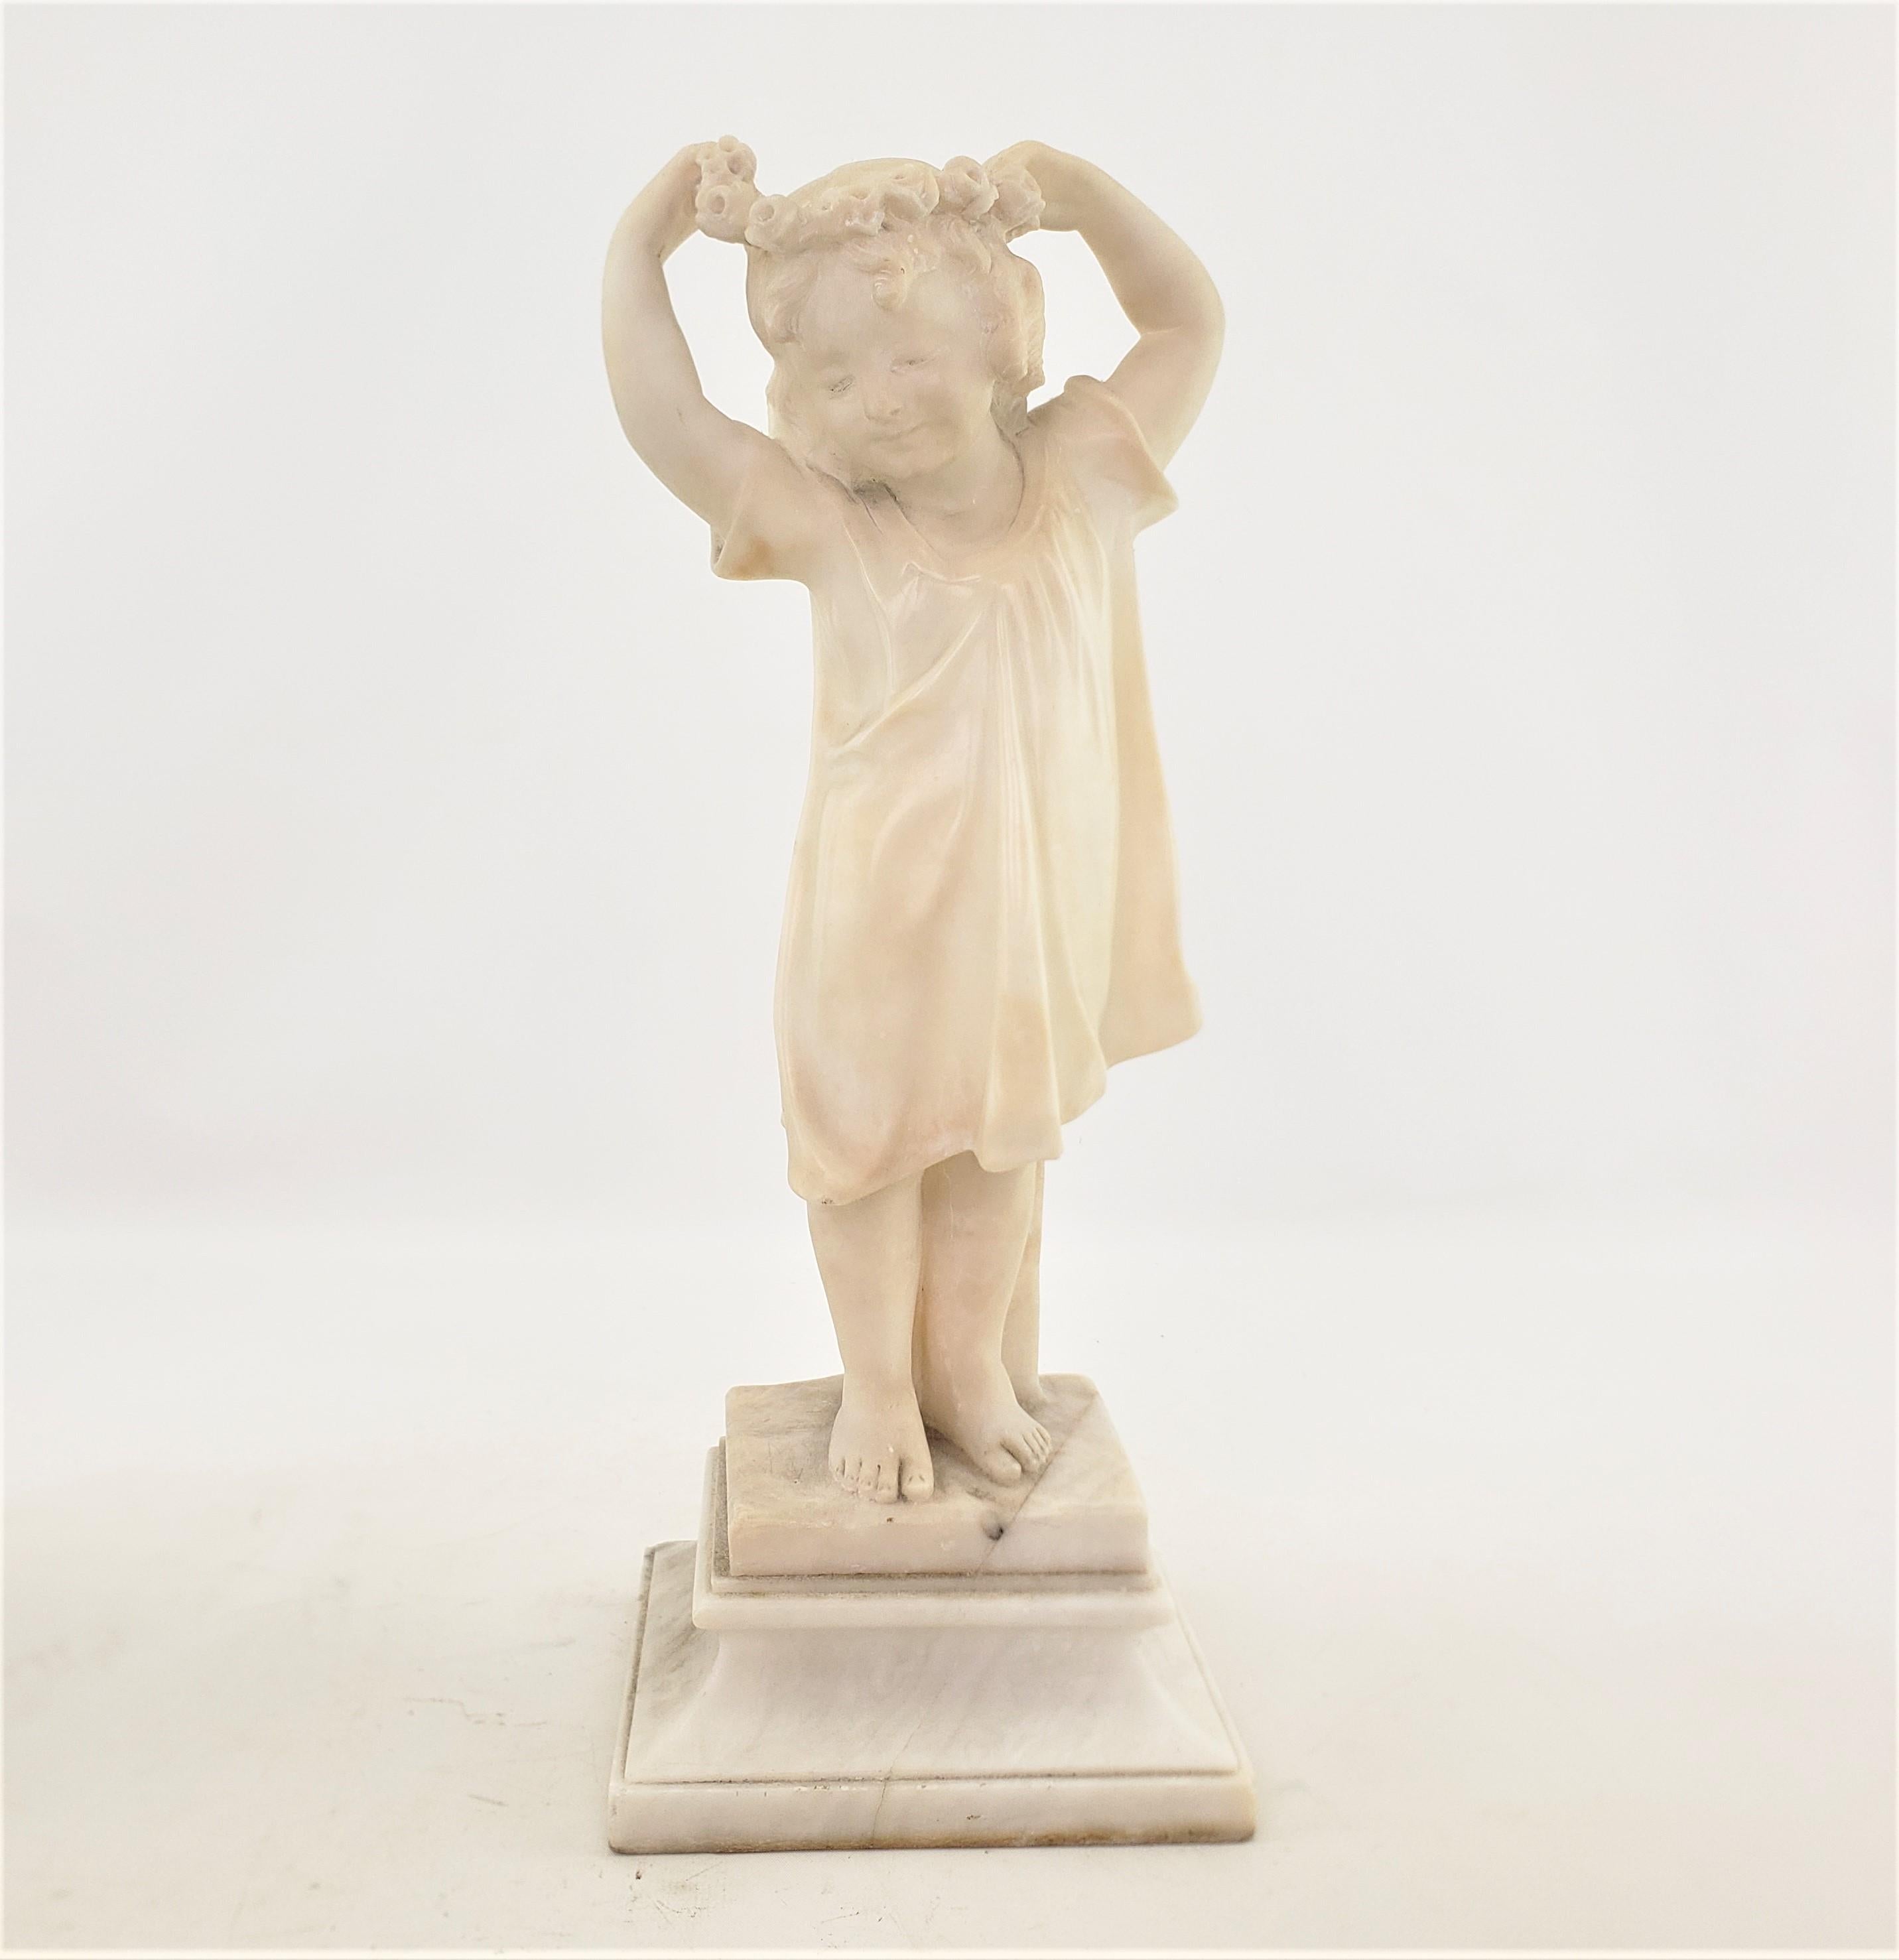 Late Victorian Antique Hand-Carved Alabaster Sculpture of a Young Girl with Flowered Headband